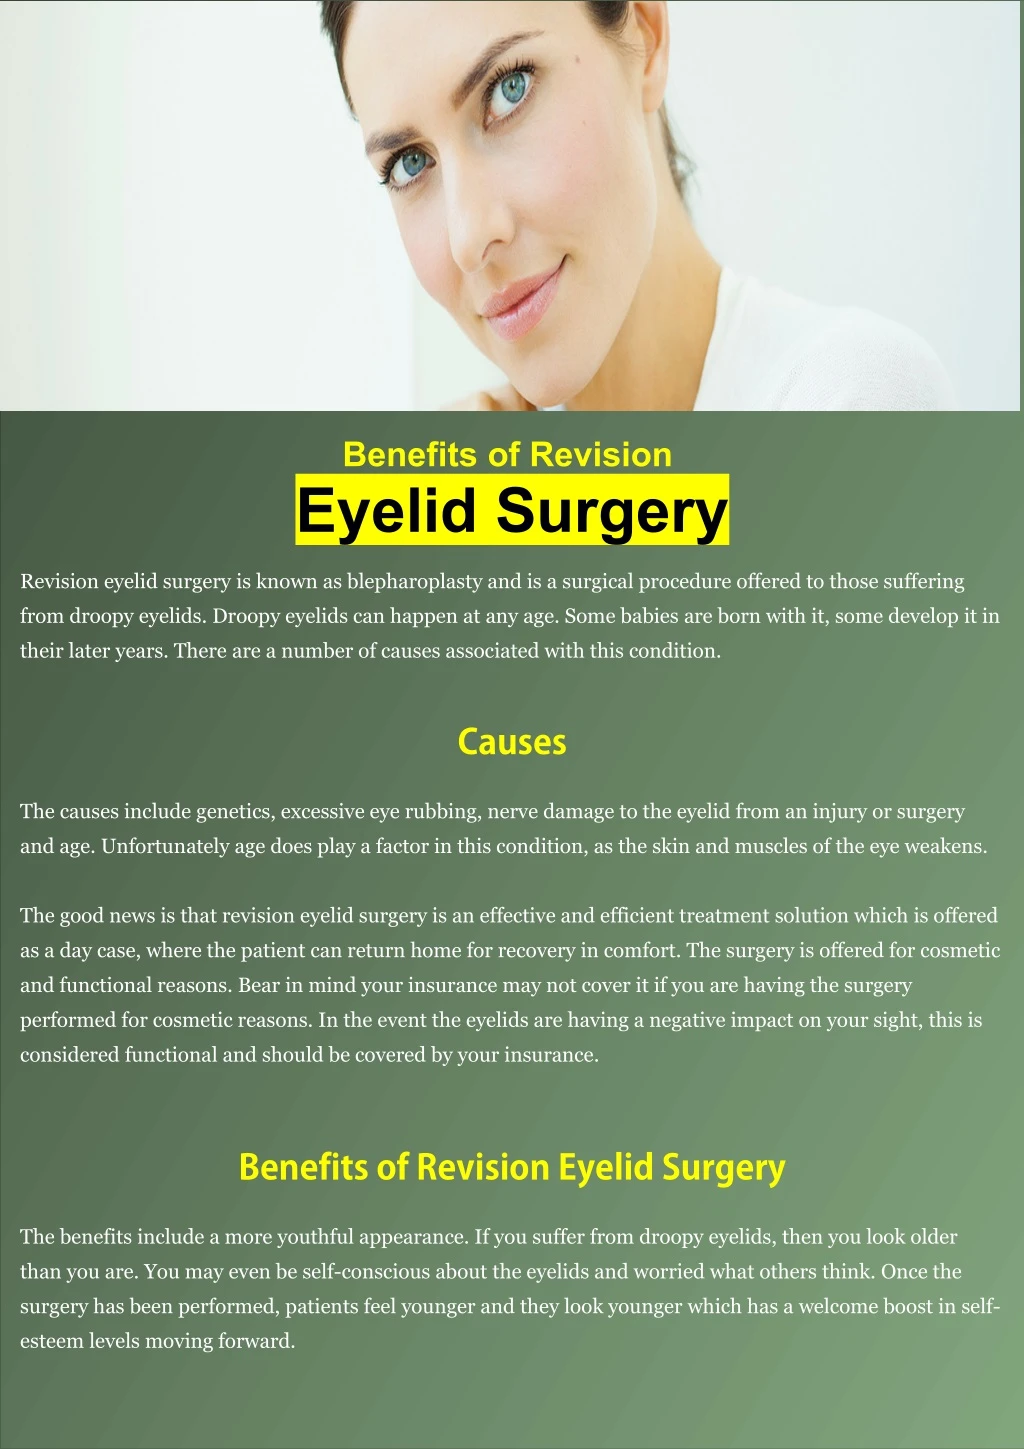 benefits of revision eyelid surgery